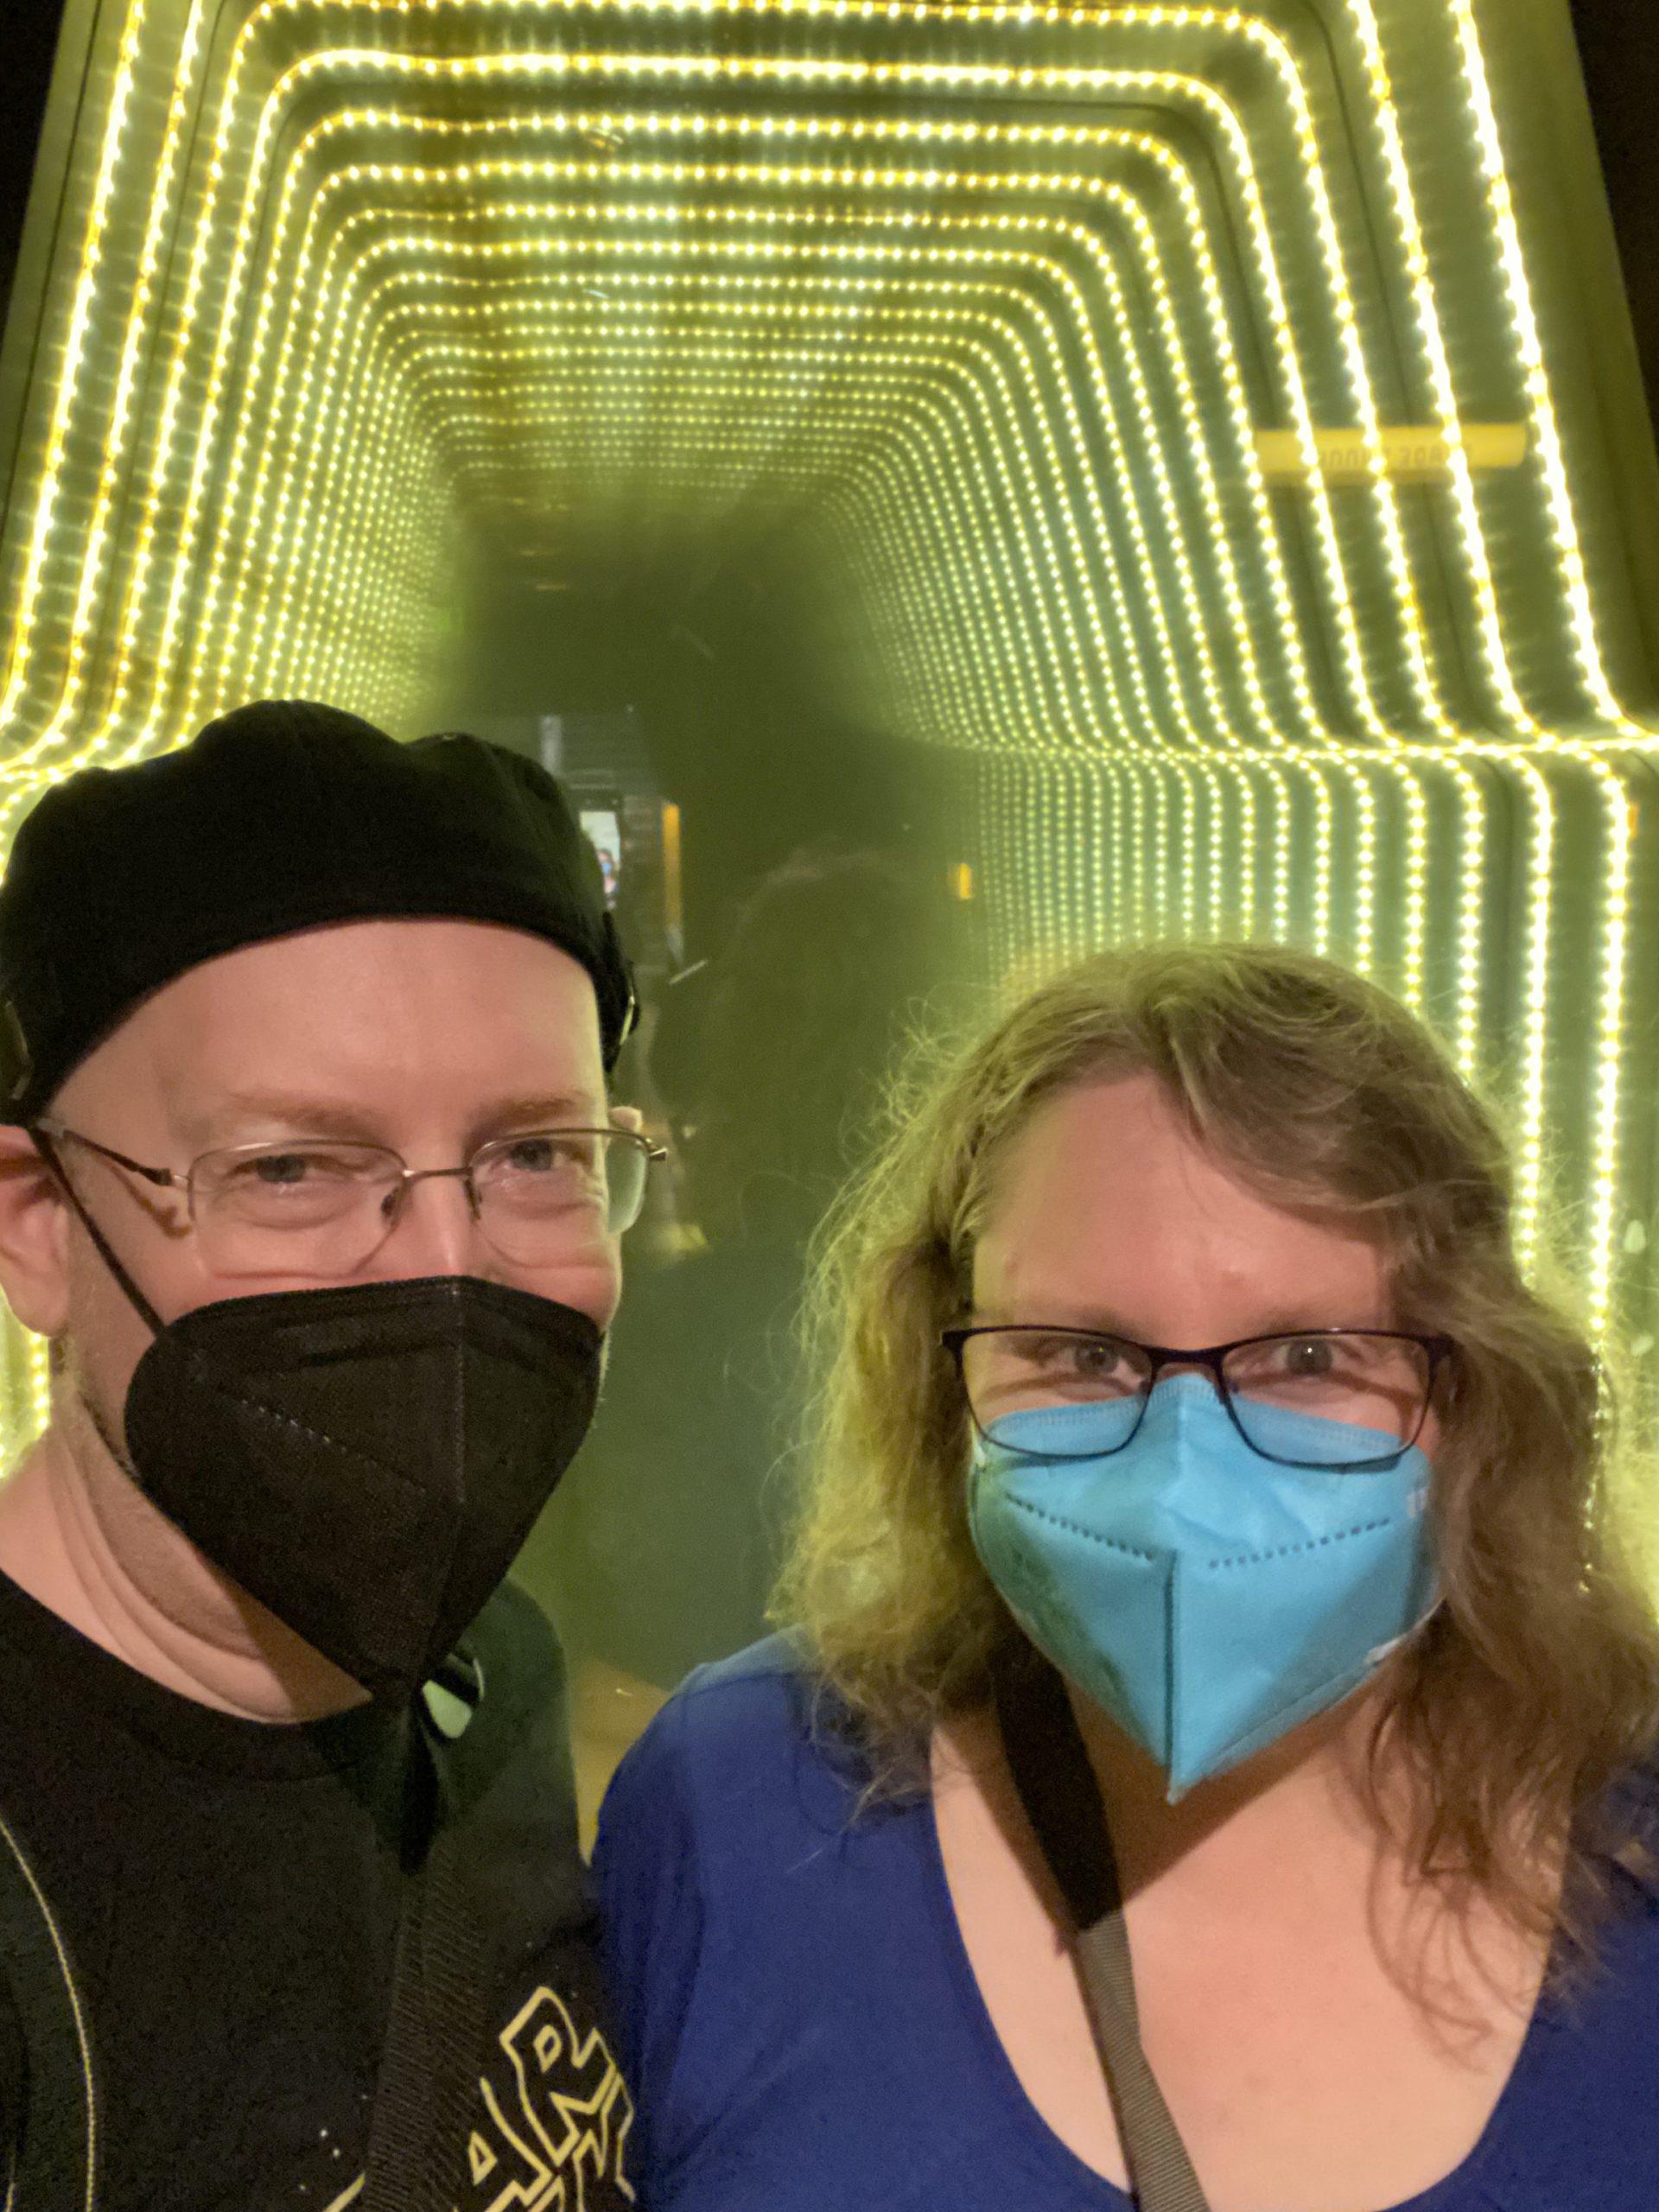 My wife and I in front of what looks like a science-fiction corridor, created with lights and mirrors.